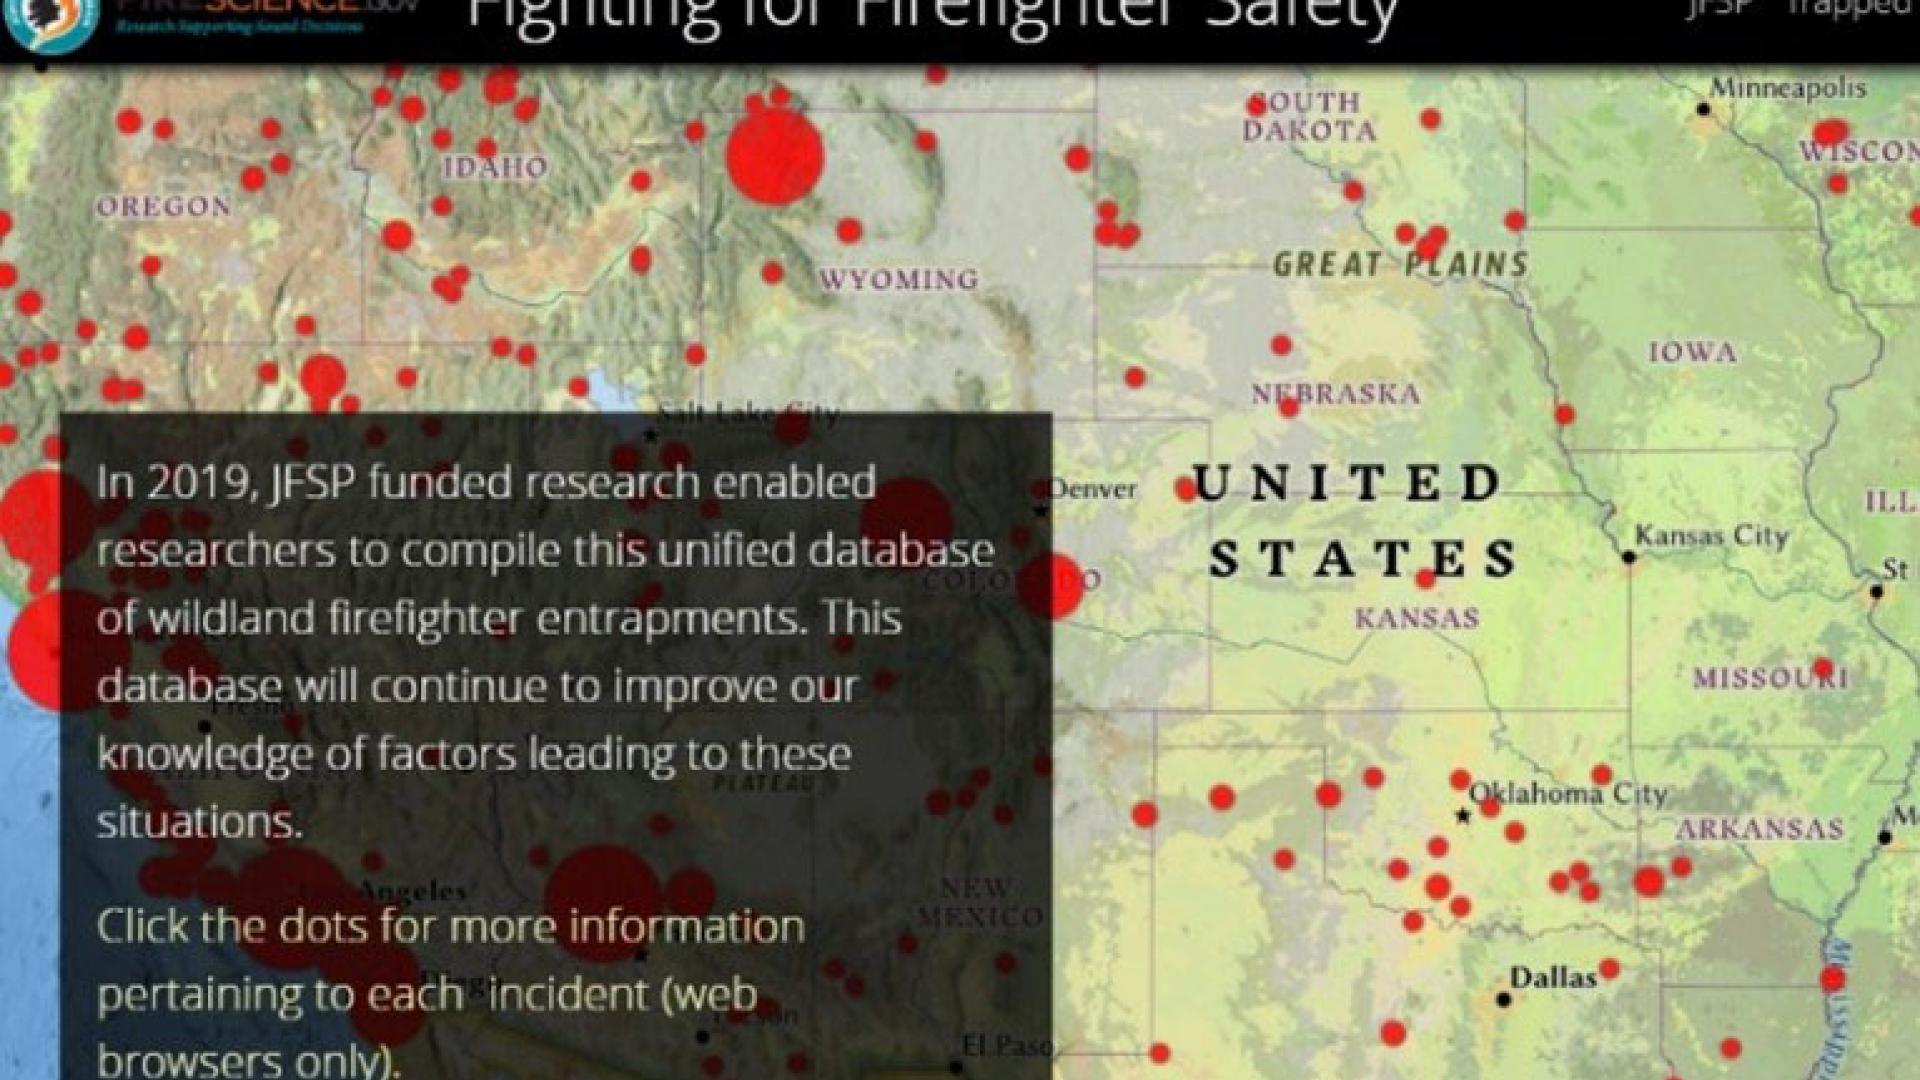 In 2019, the Joint Fire Science Program funded research to compile a unified database of wildland firefighter entrapments and improve our knowledge of factors leading to these situations. This is one example of how JFSP funding is furthering wildland fire